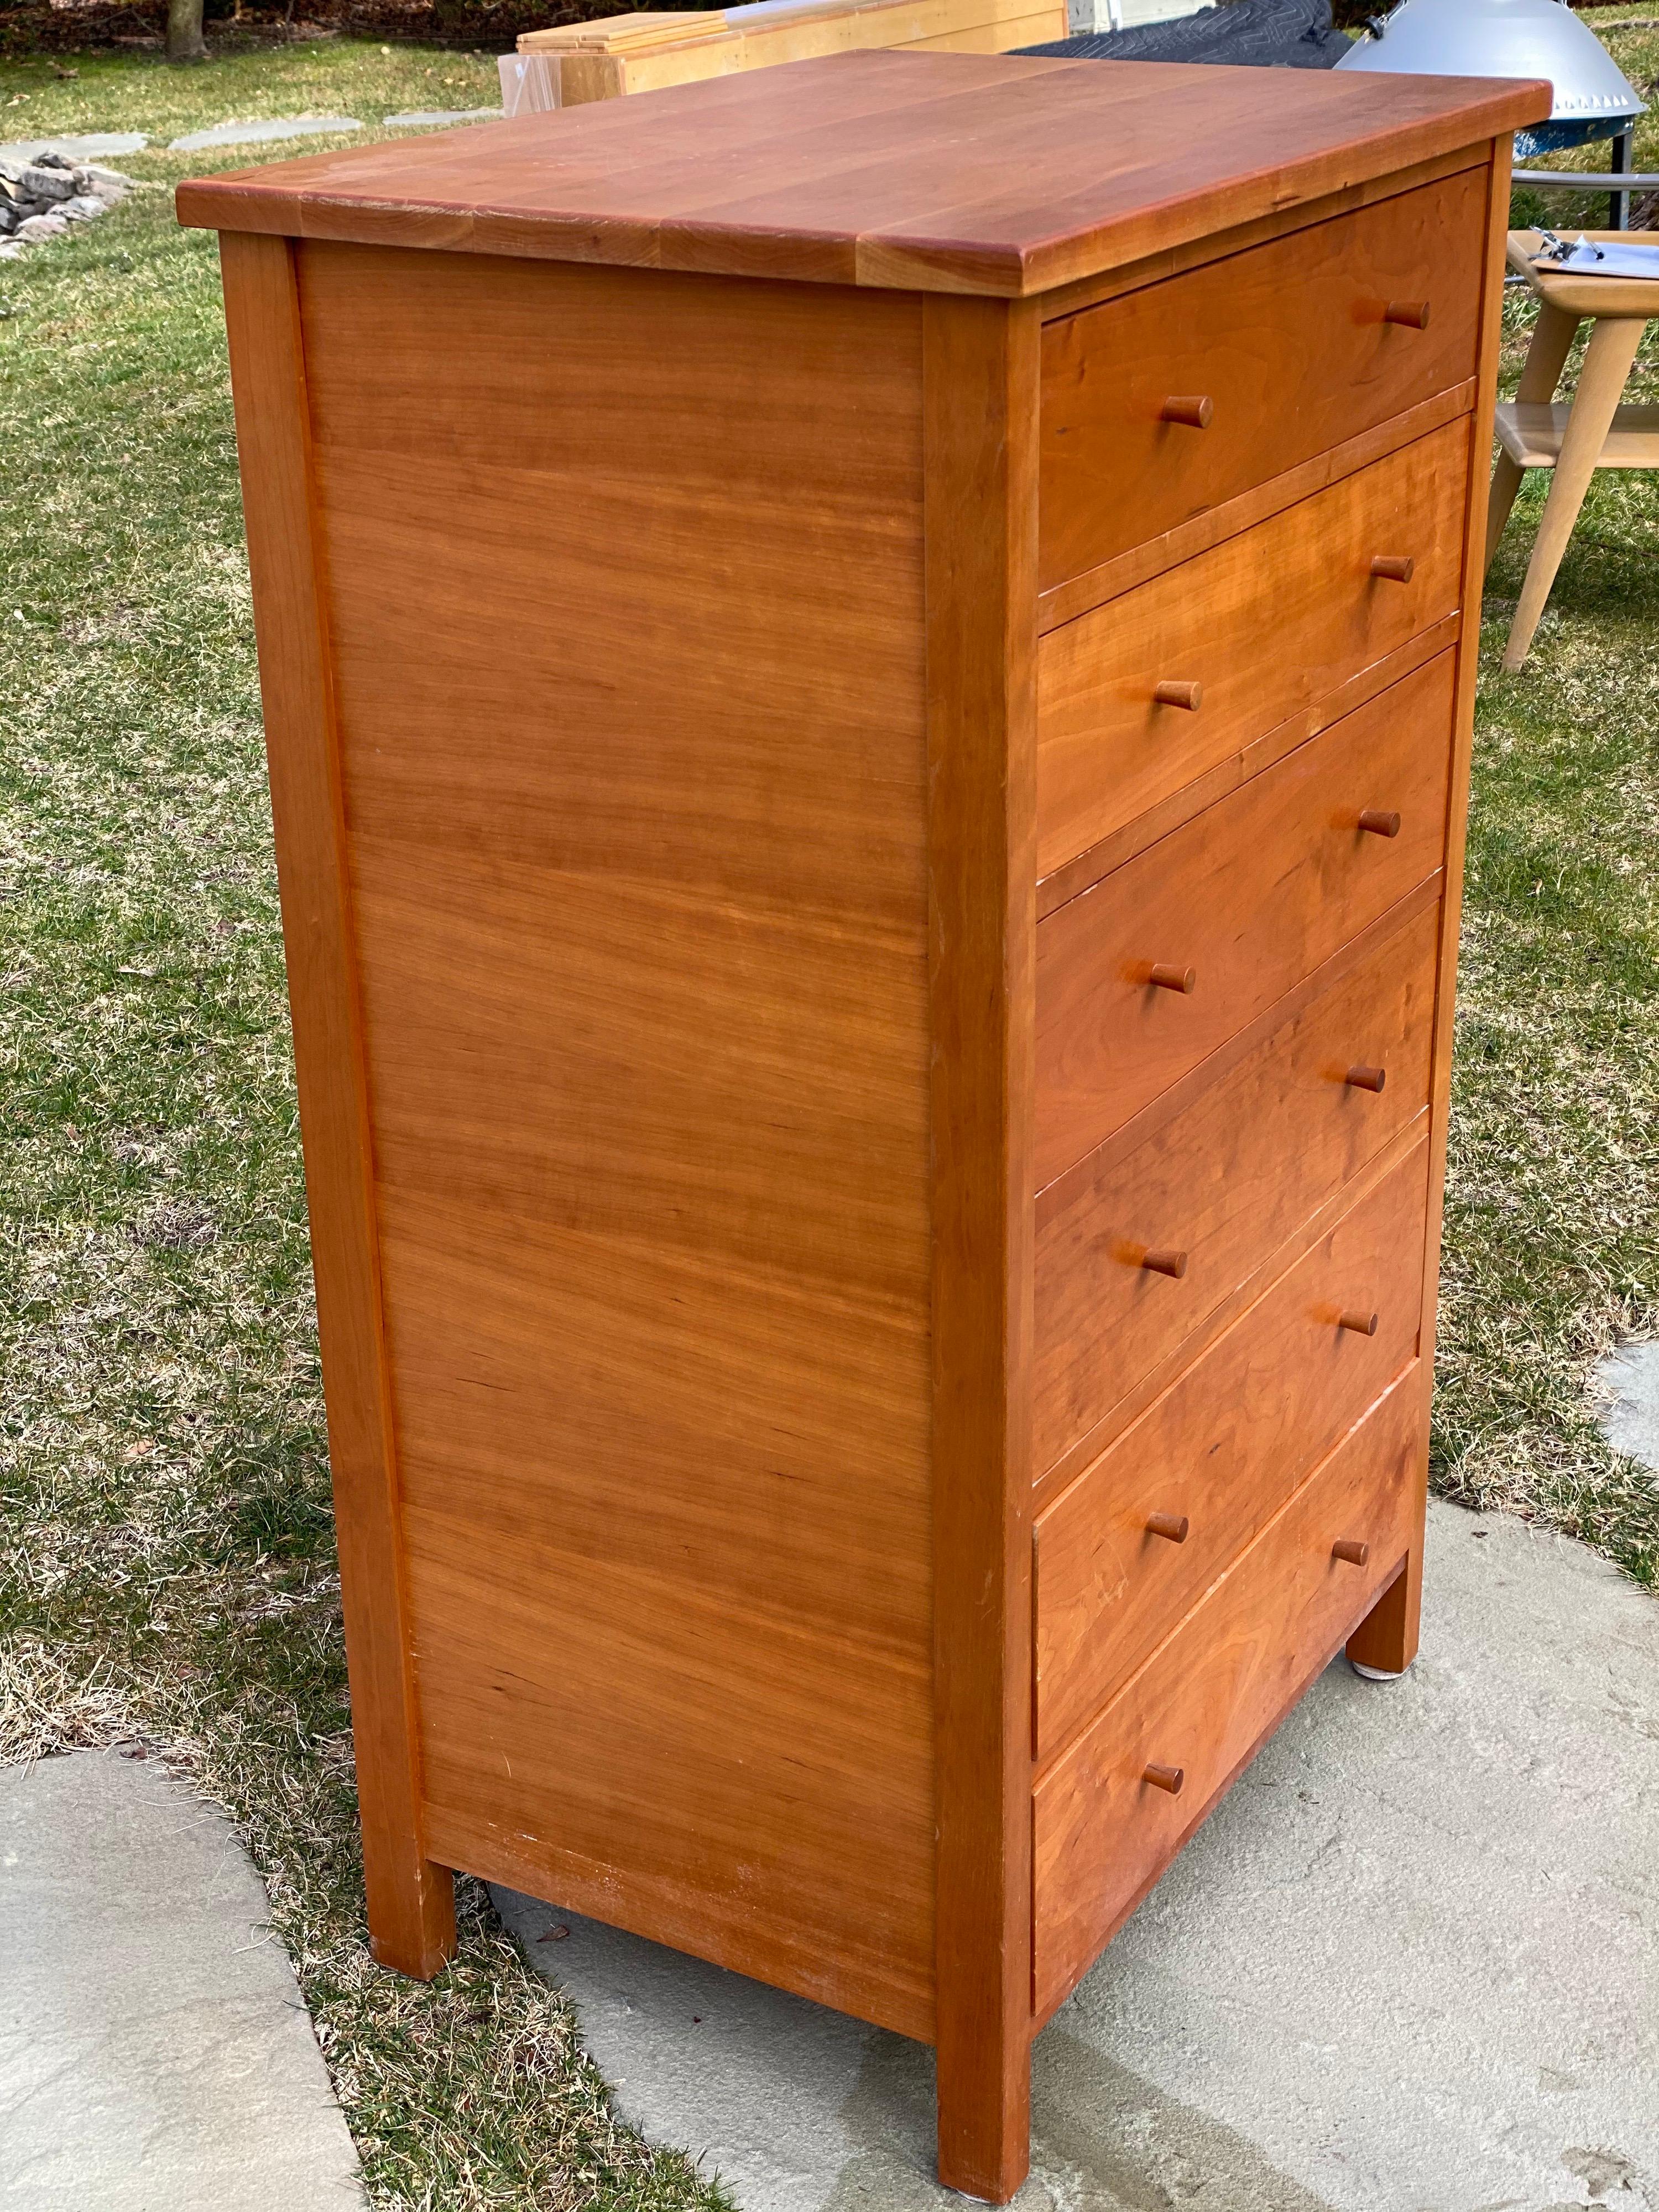 American Cherry Shaker chest of drawers
A classic clean lined chest which goes well in both traditional and modern spaces. Six drawers. Lovely tapered knobs. Good overall condition. General wear. Some surface wear and scuffs to the back and bottom